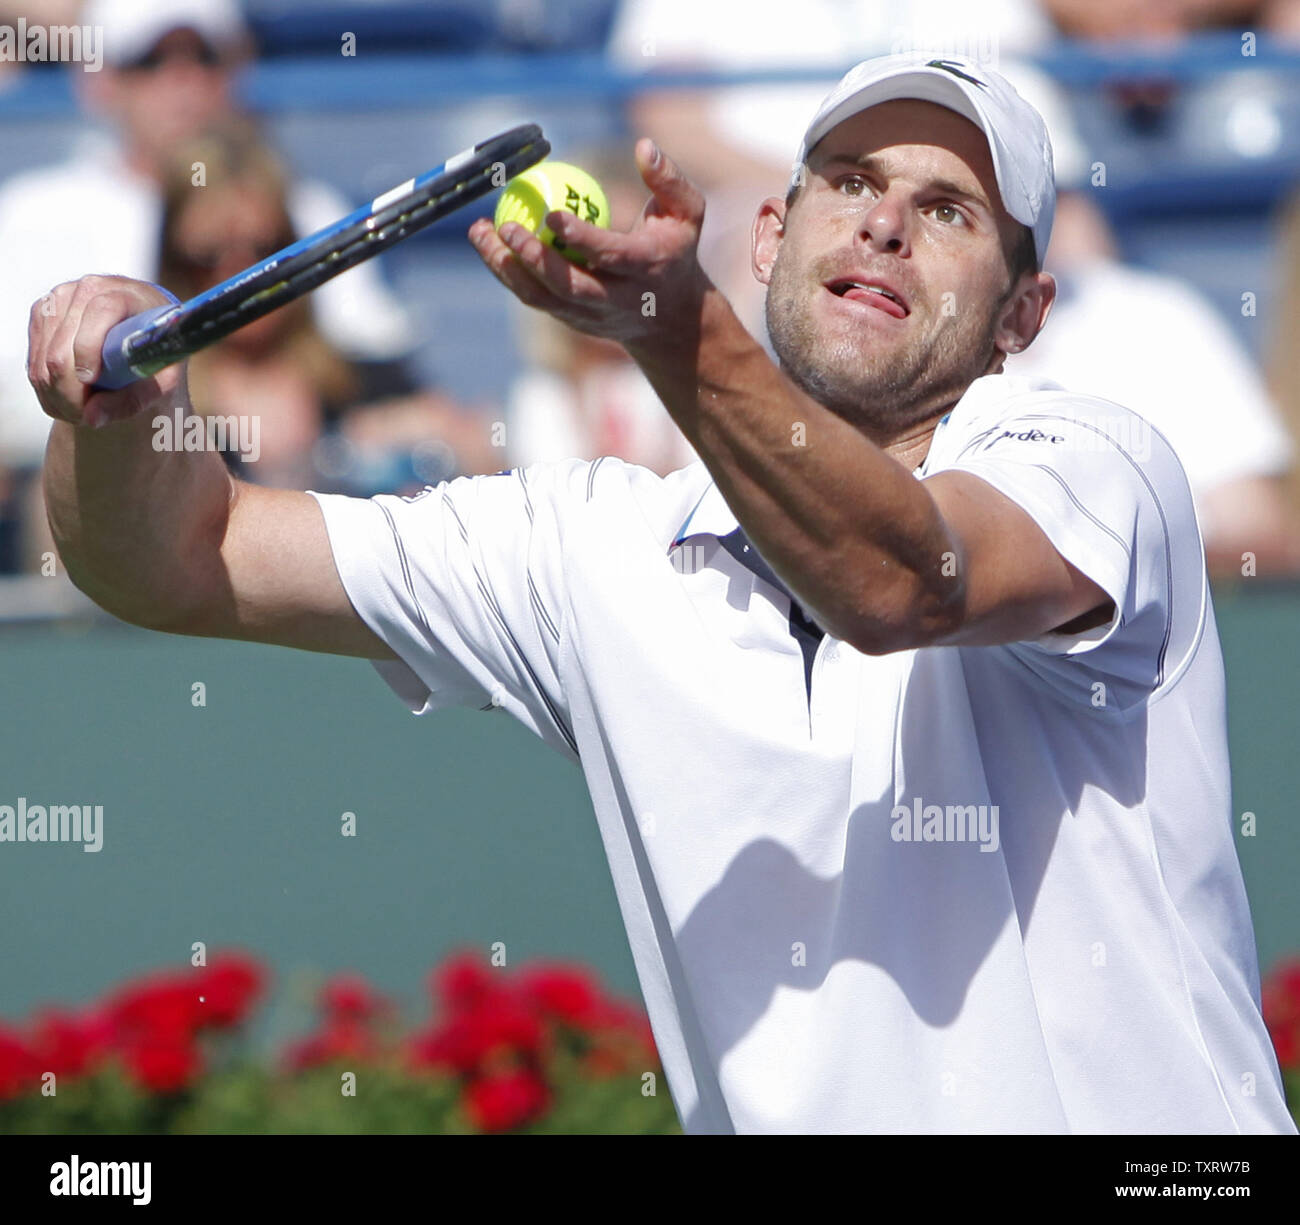 American Andy Roddick prepares to hit a serve during his mens semi-final match against Swede Robin Soderling at the BNP Paribas Open in Indian Wells, California on March 20, 2010.   Roddick defeated Soderling 6-4, 3-6, 6-3 to advance to the tournament finals.   UPI/David Silpa Stock Photo